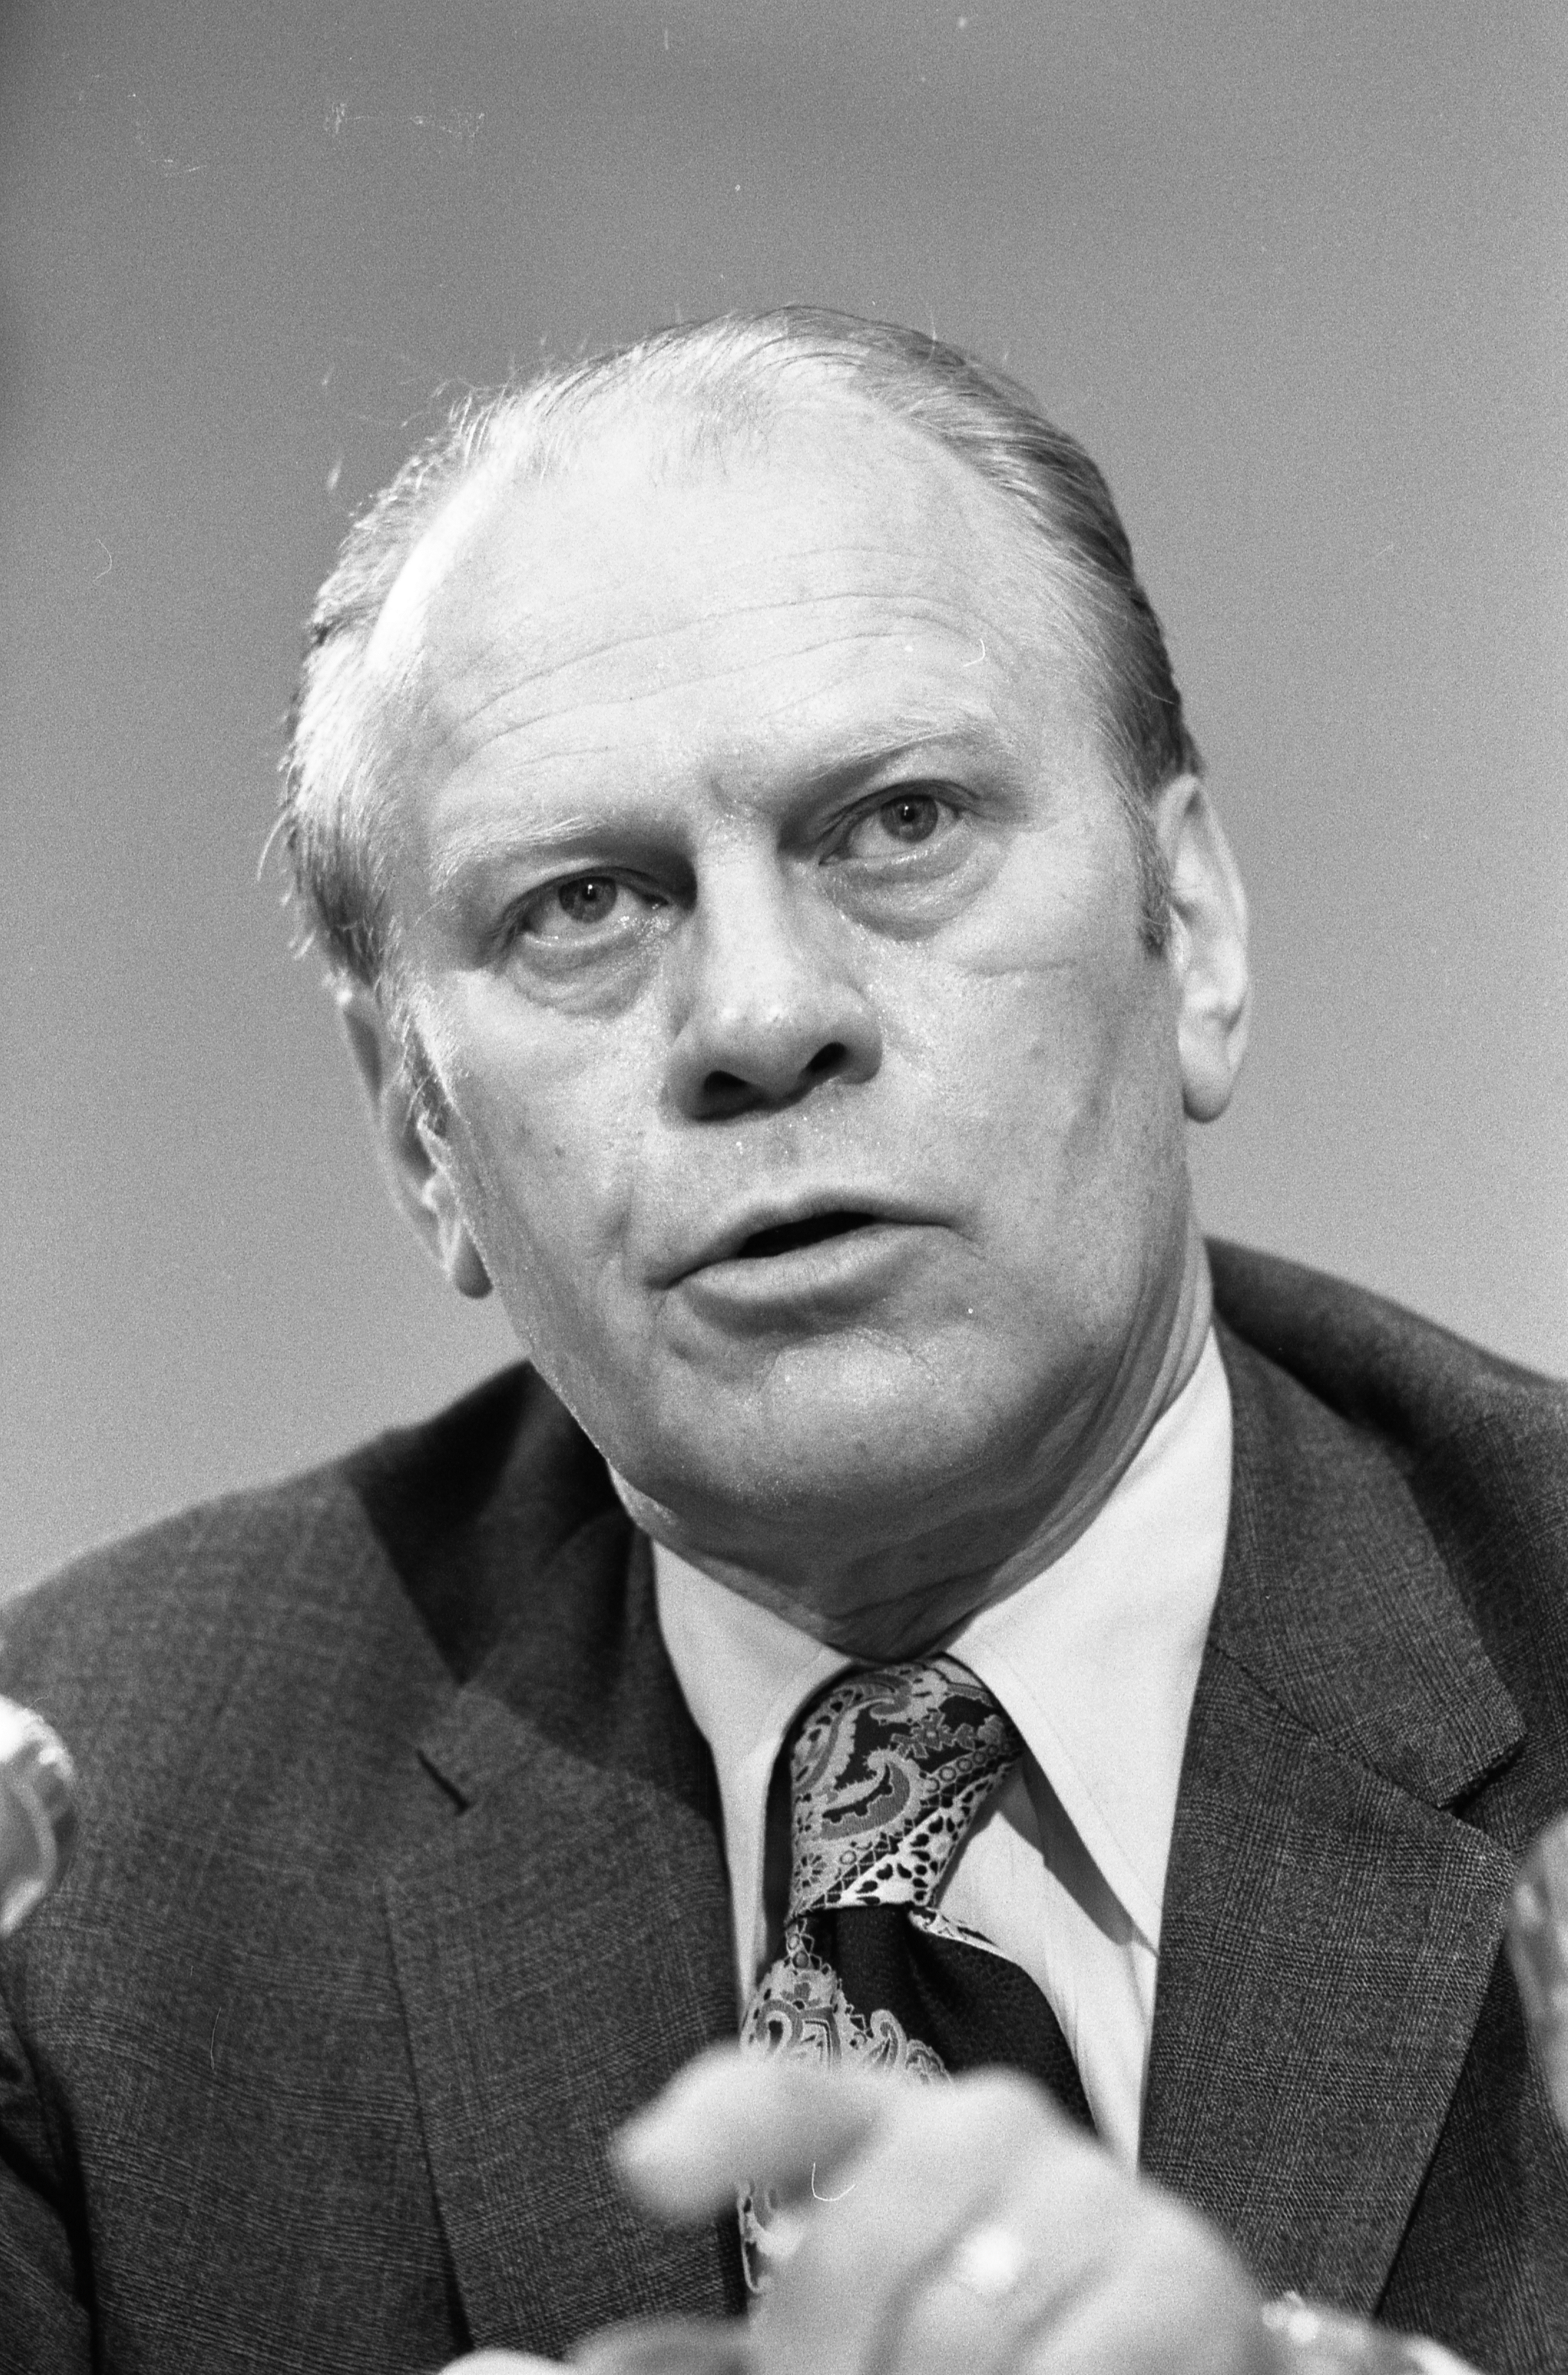 Gerald R. Ford giving testimony at his Vice Presidential confirmation hearing before the House Judiciary committee, 11/15/1973